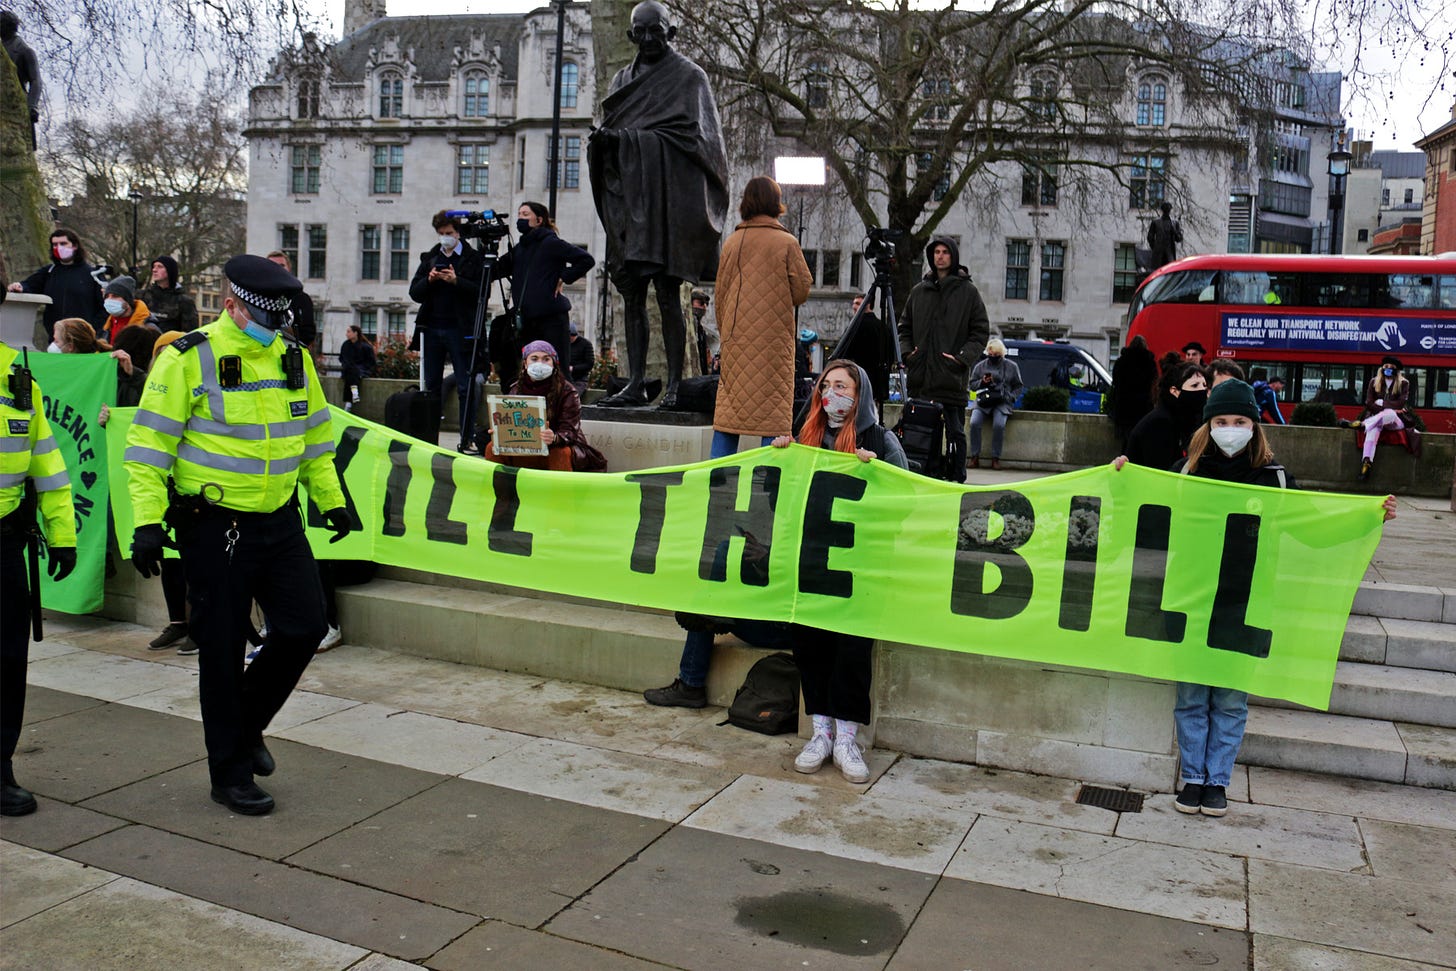 Protesters hold a banner saying "kill the bill" in front of a statue of Gandhi in London.